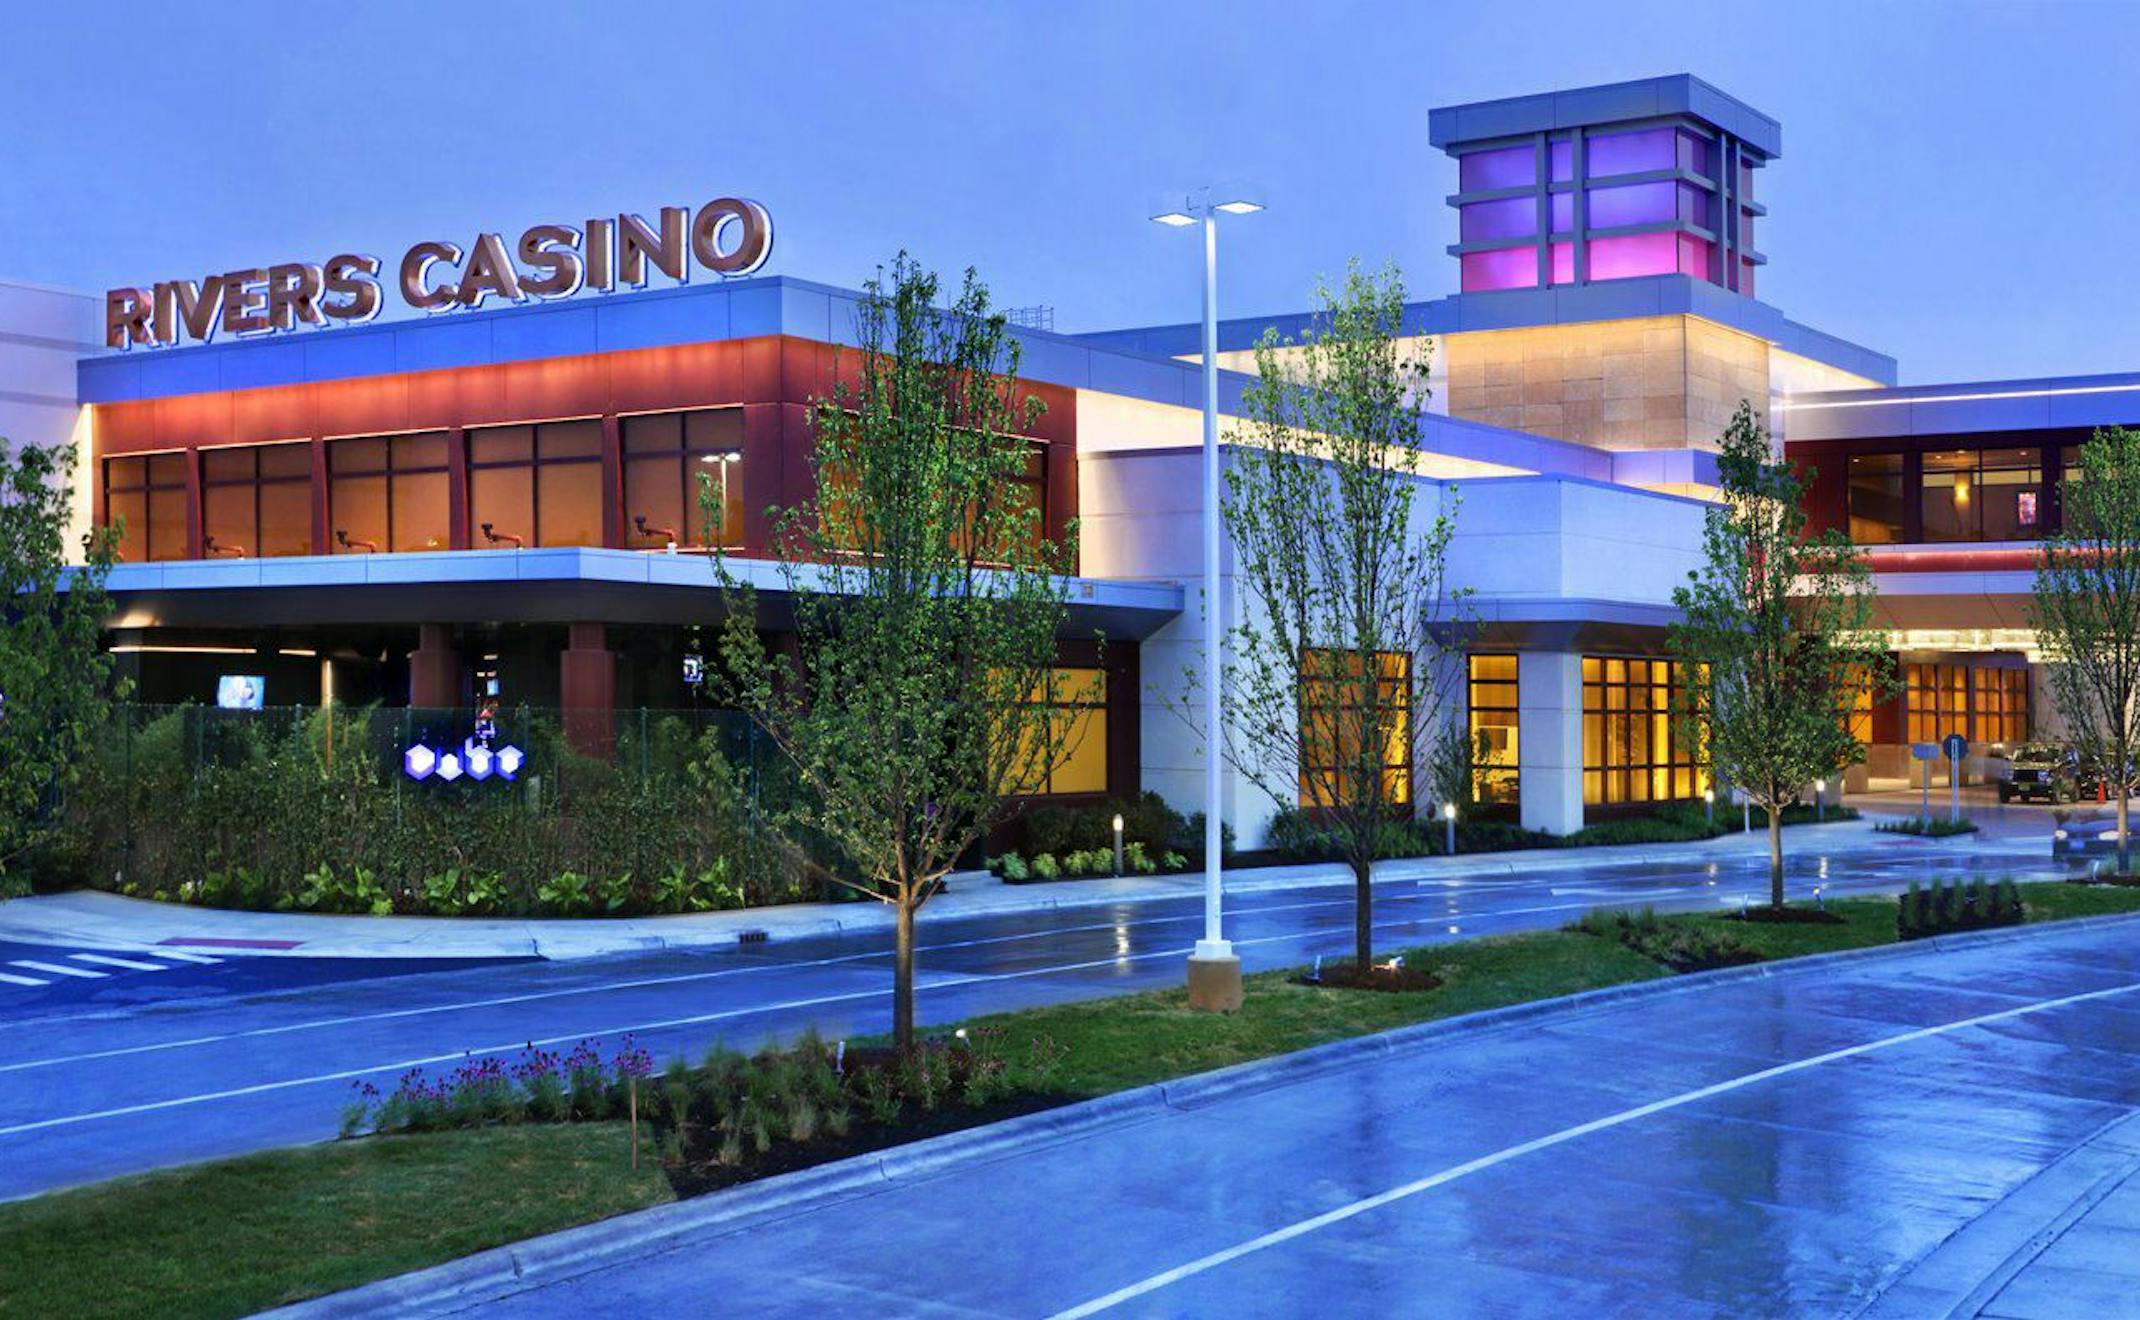 River city casino security phone number